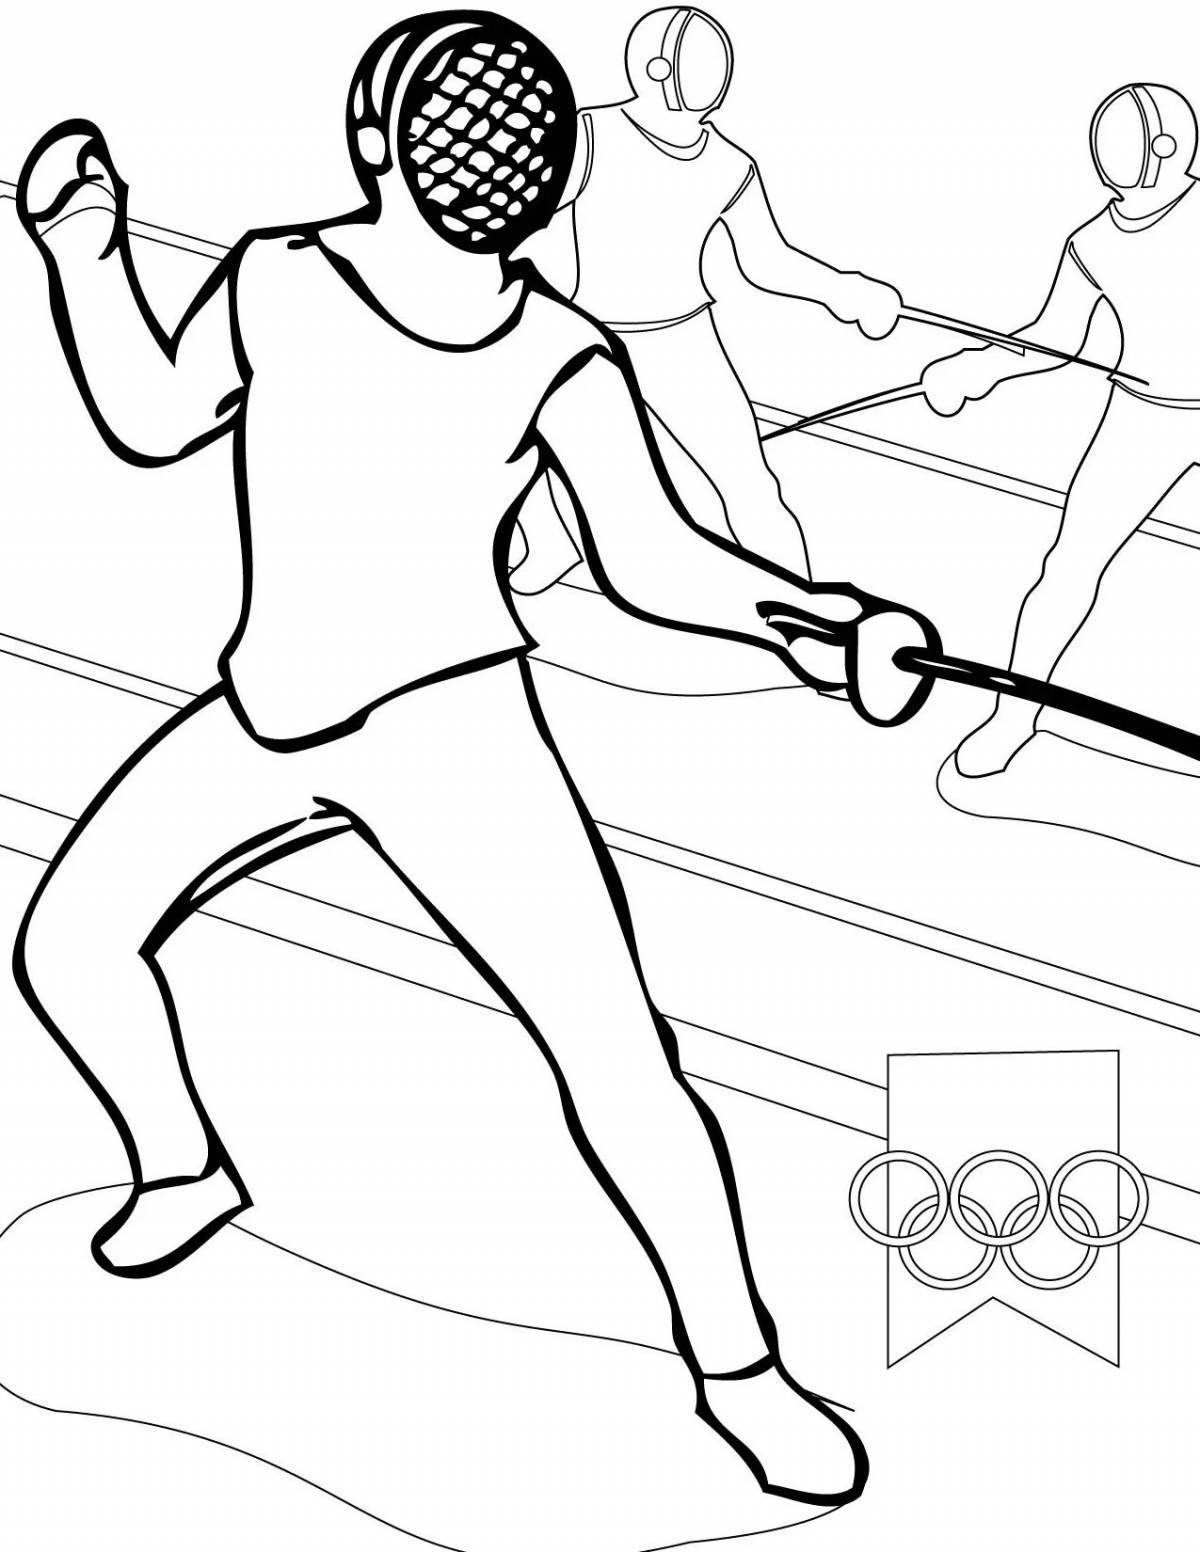 Animated fencing coloring page